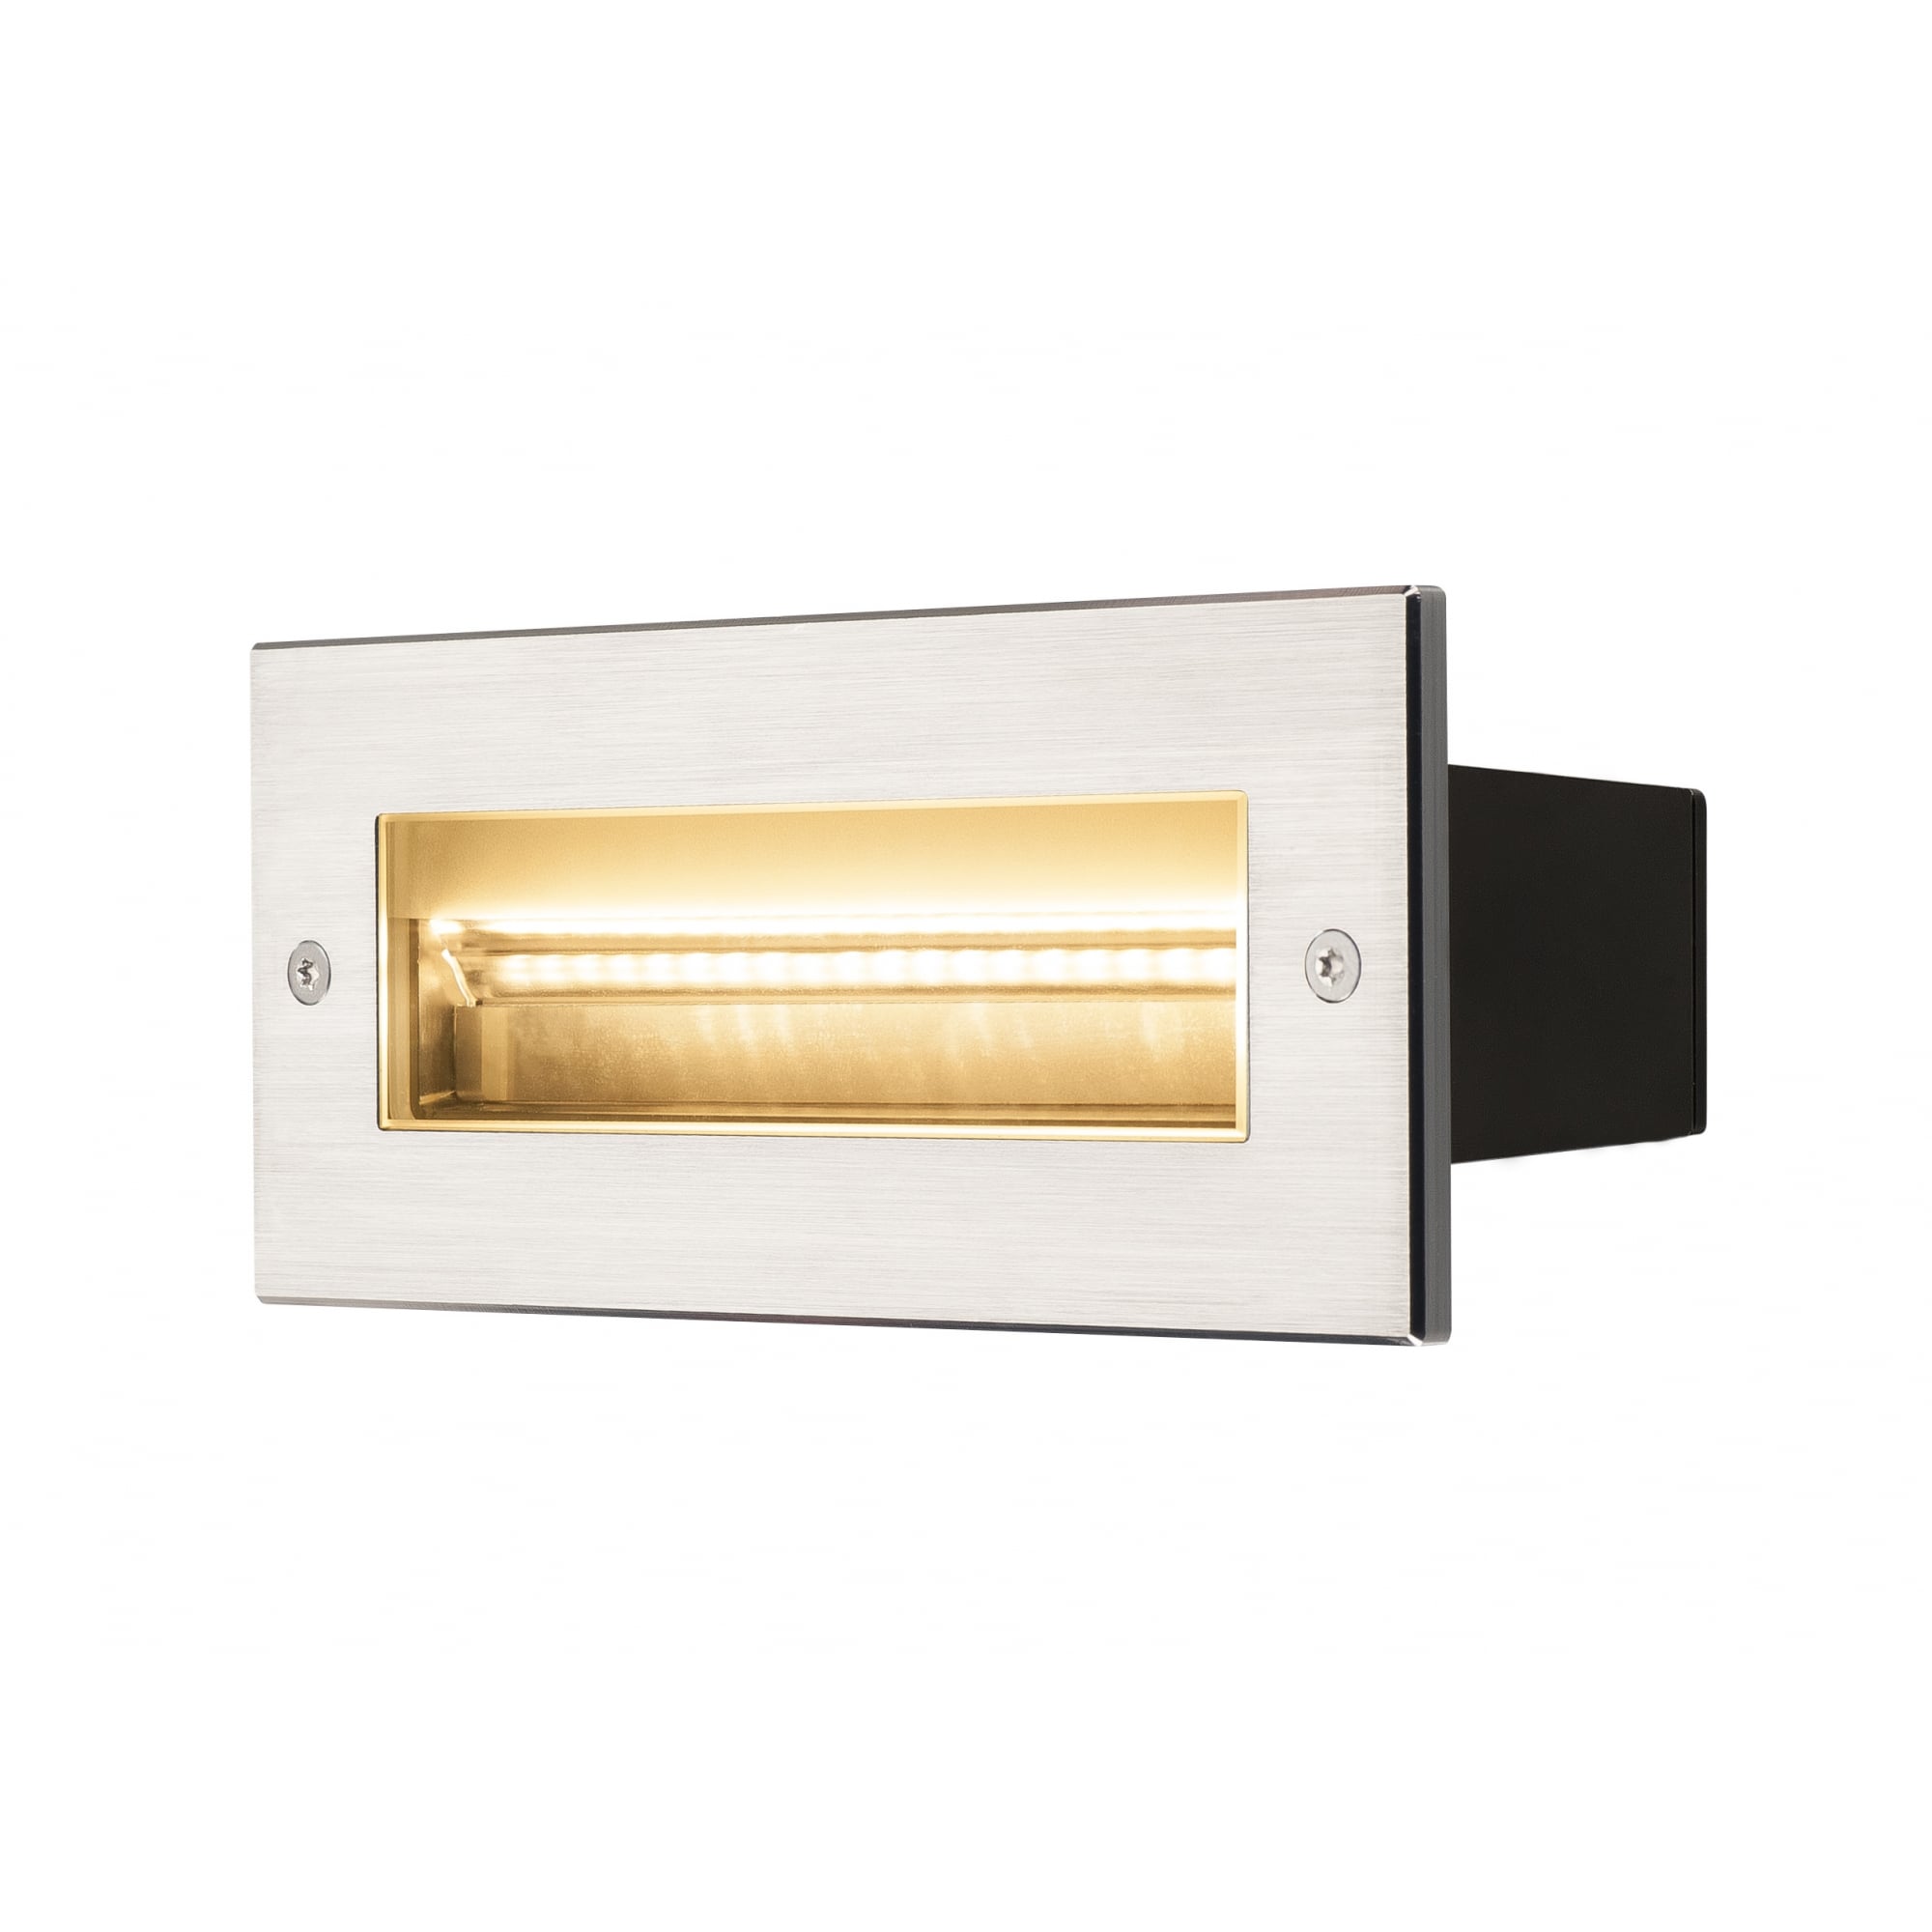 Brick, Outdoor Recessed Wall Light, LED, 3000K, Stainless Steel, 240V, IP67, 850Lm, 10W